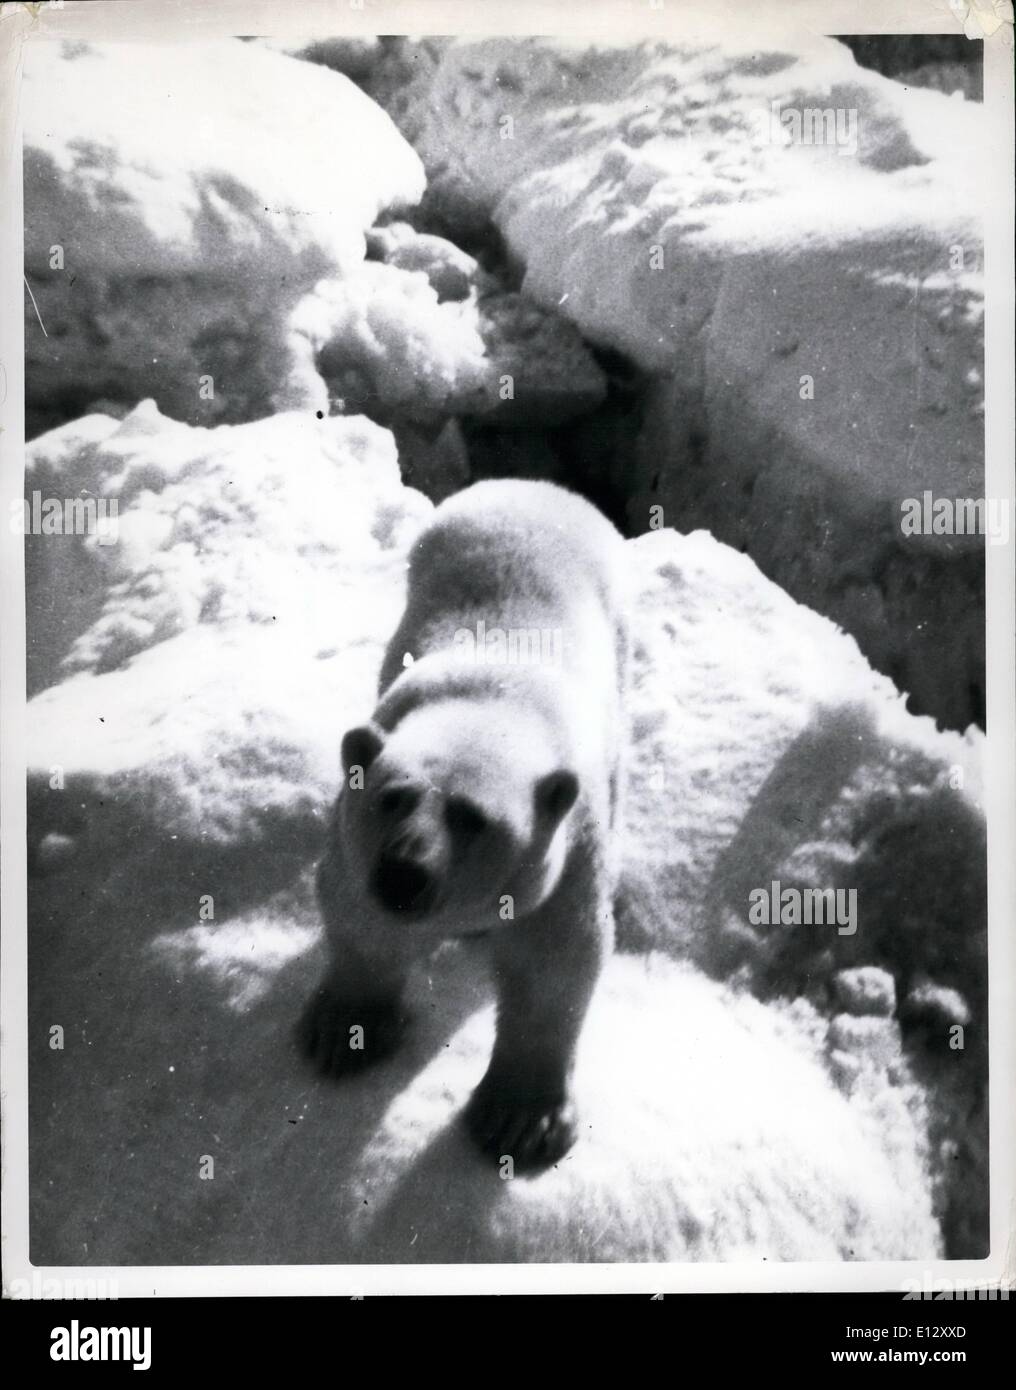 Feb. 25, 2012 - January 1955 Arctic resupply mission (Sunec). Welcome to the Arctic Mr. Bear might be saying in this portrait. The bold animal seemed to developed an affection for his visitors and even swam a mile out to sea to visit them. Stock Photo